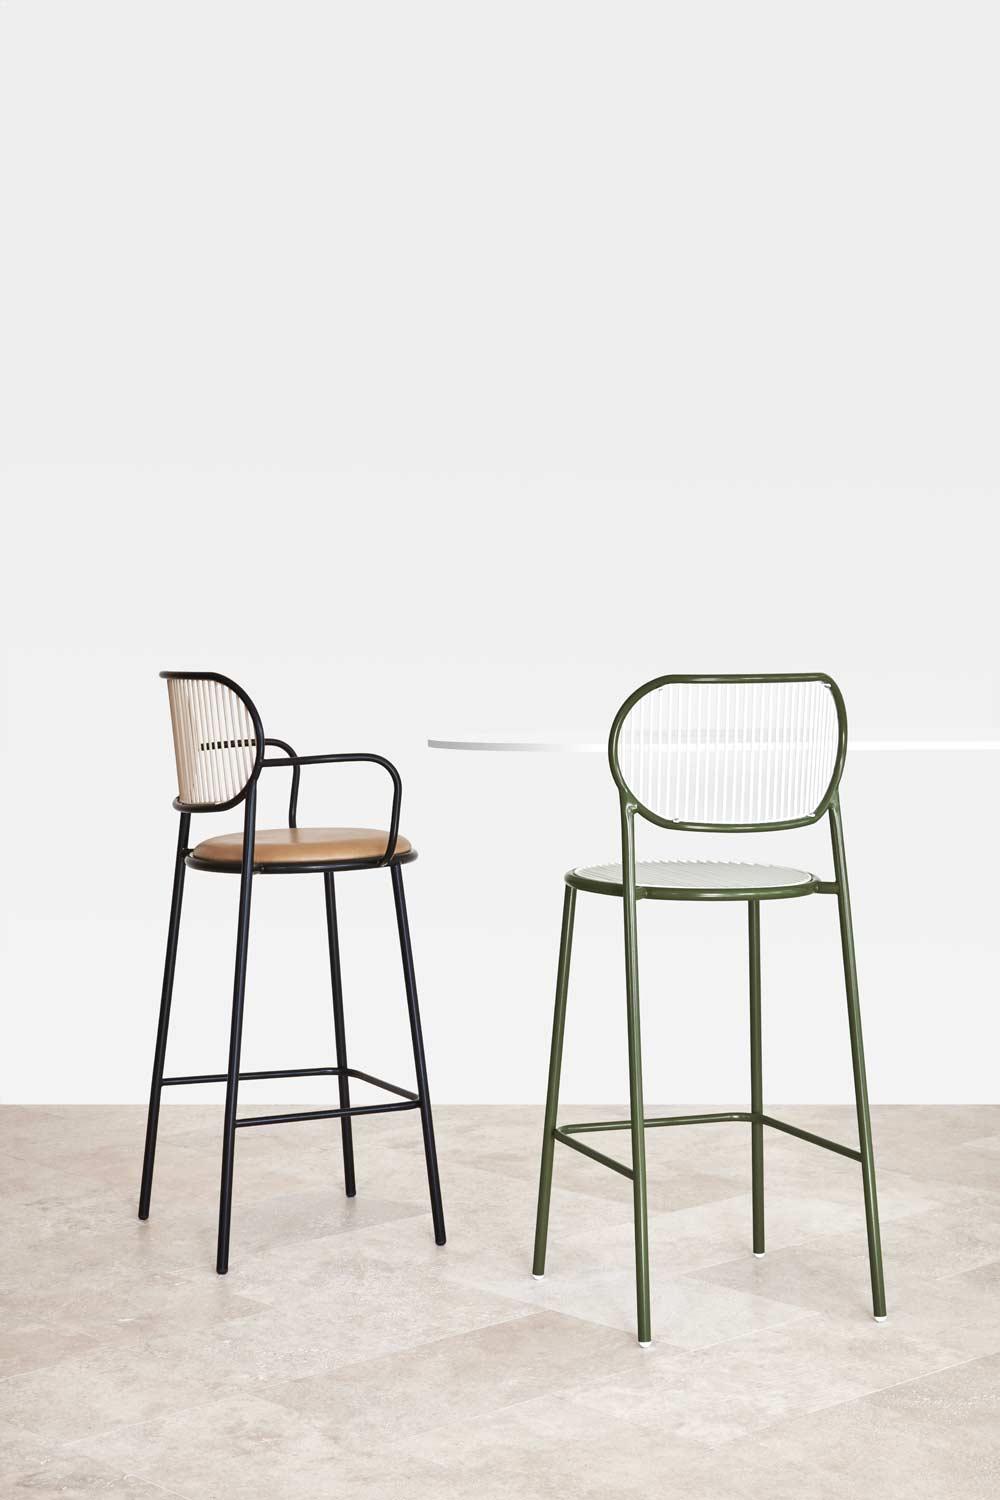 Piper Bar Counter Chair Upholstered | Fabric or Leather Seat | Designed by GibsonKarlo | DesignByThem ** Seat pad: HL1 Primary - BA28 Butter. Custom green powder coat, MOQ required.